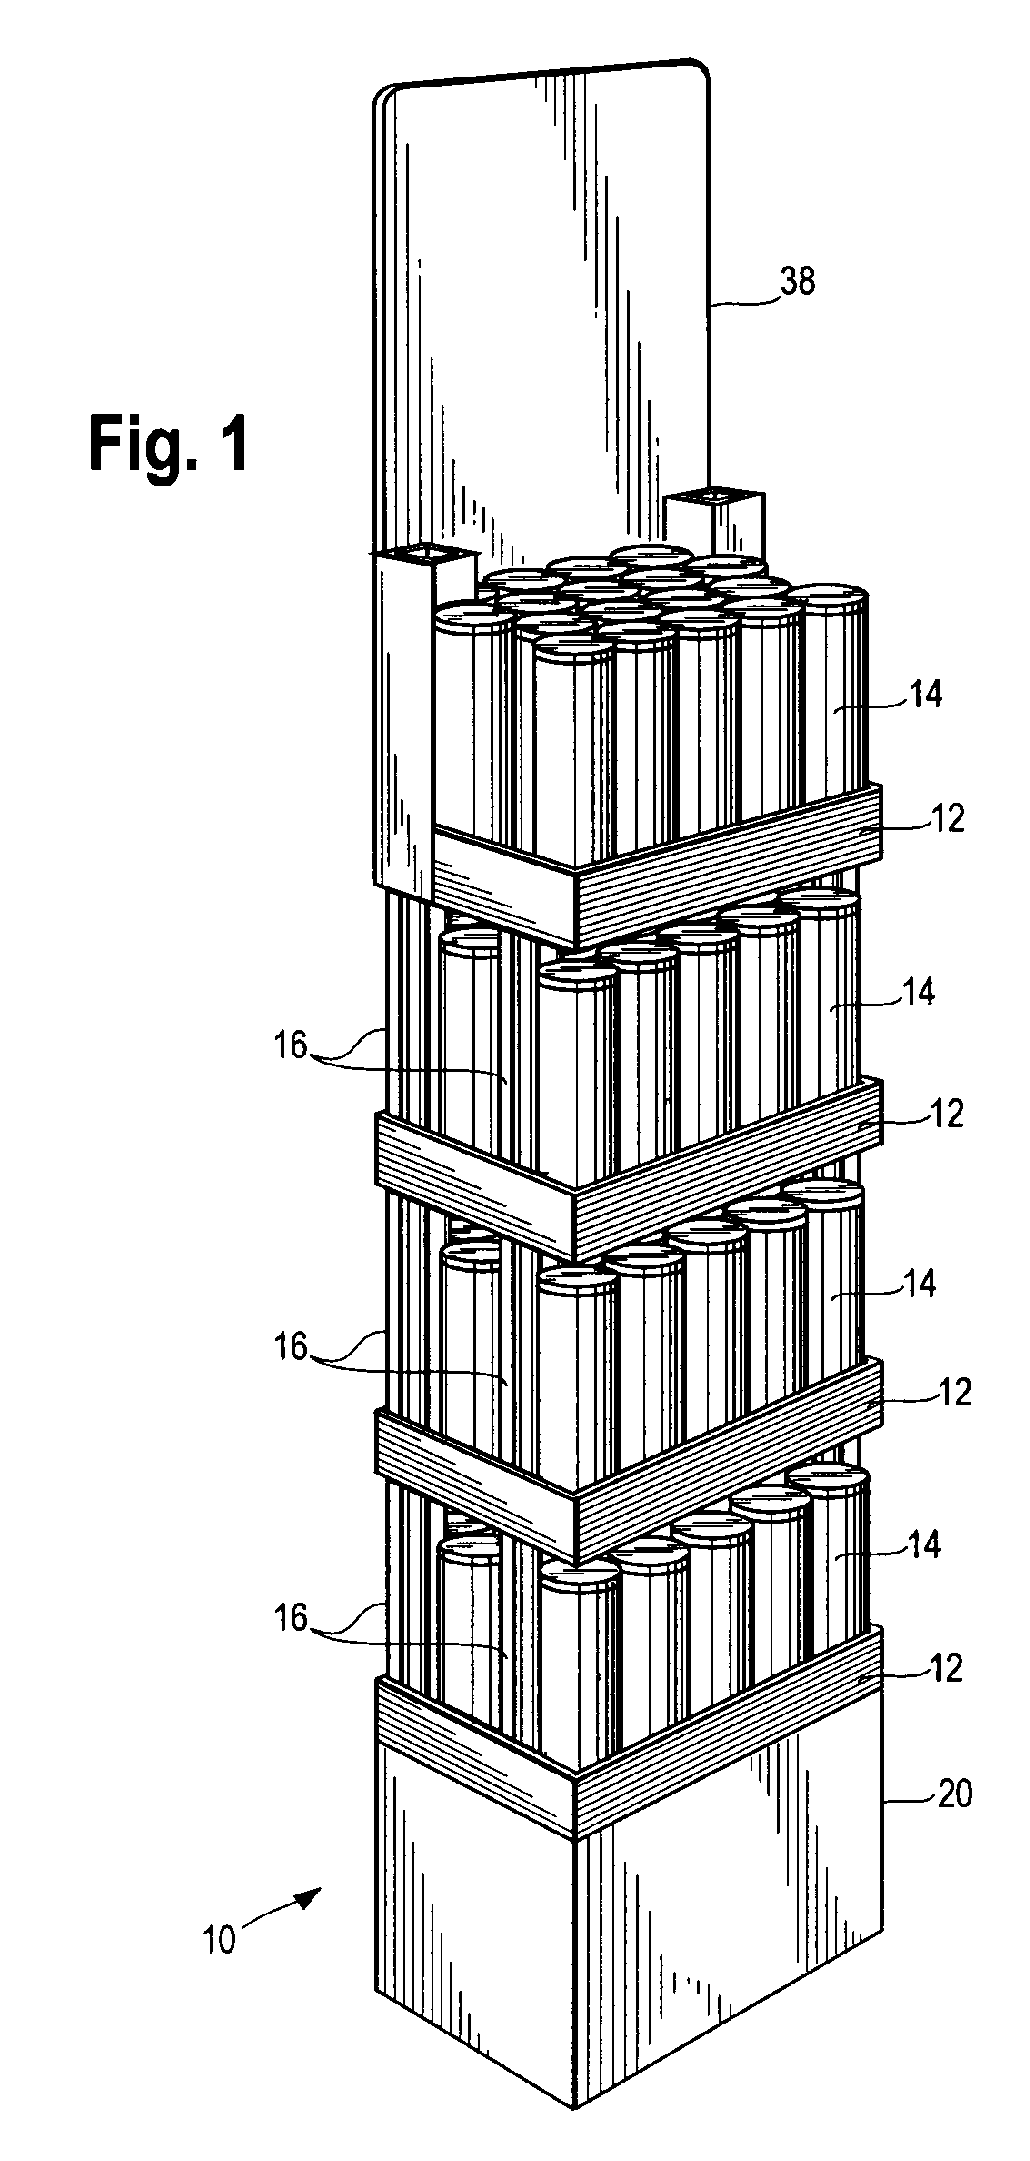 Base for post in post product packaging and display system